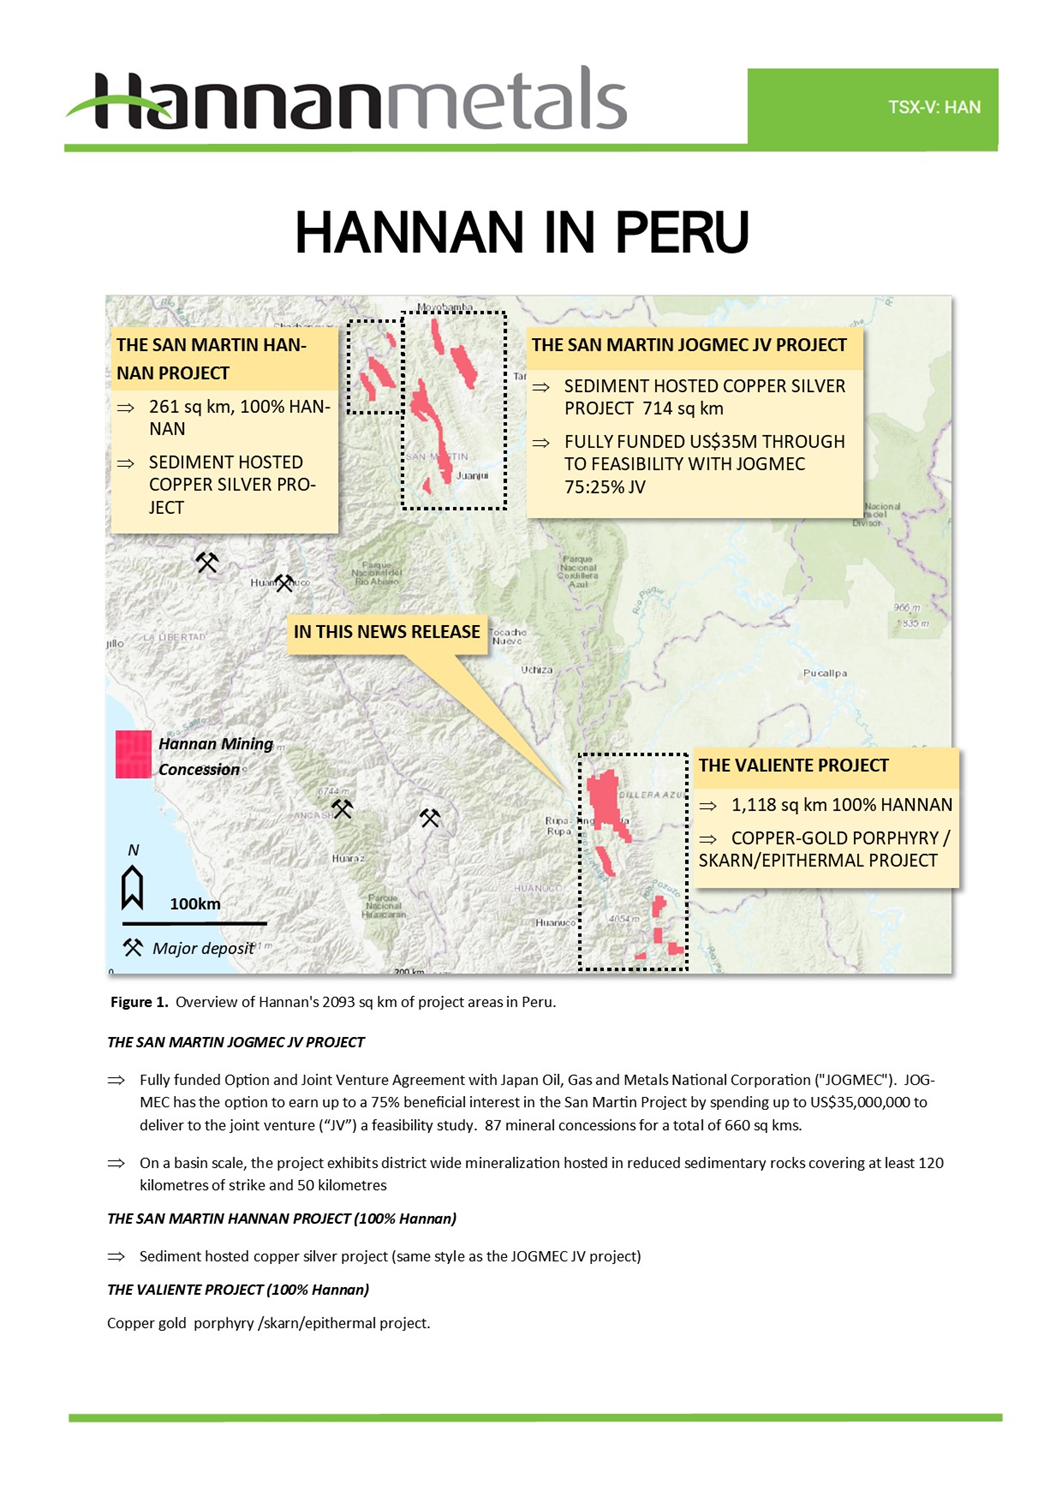 Hannan Metals Ltd., Thursday, May 12, 2022, Press release picture